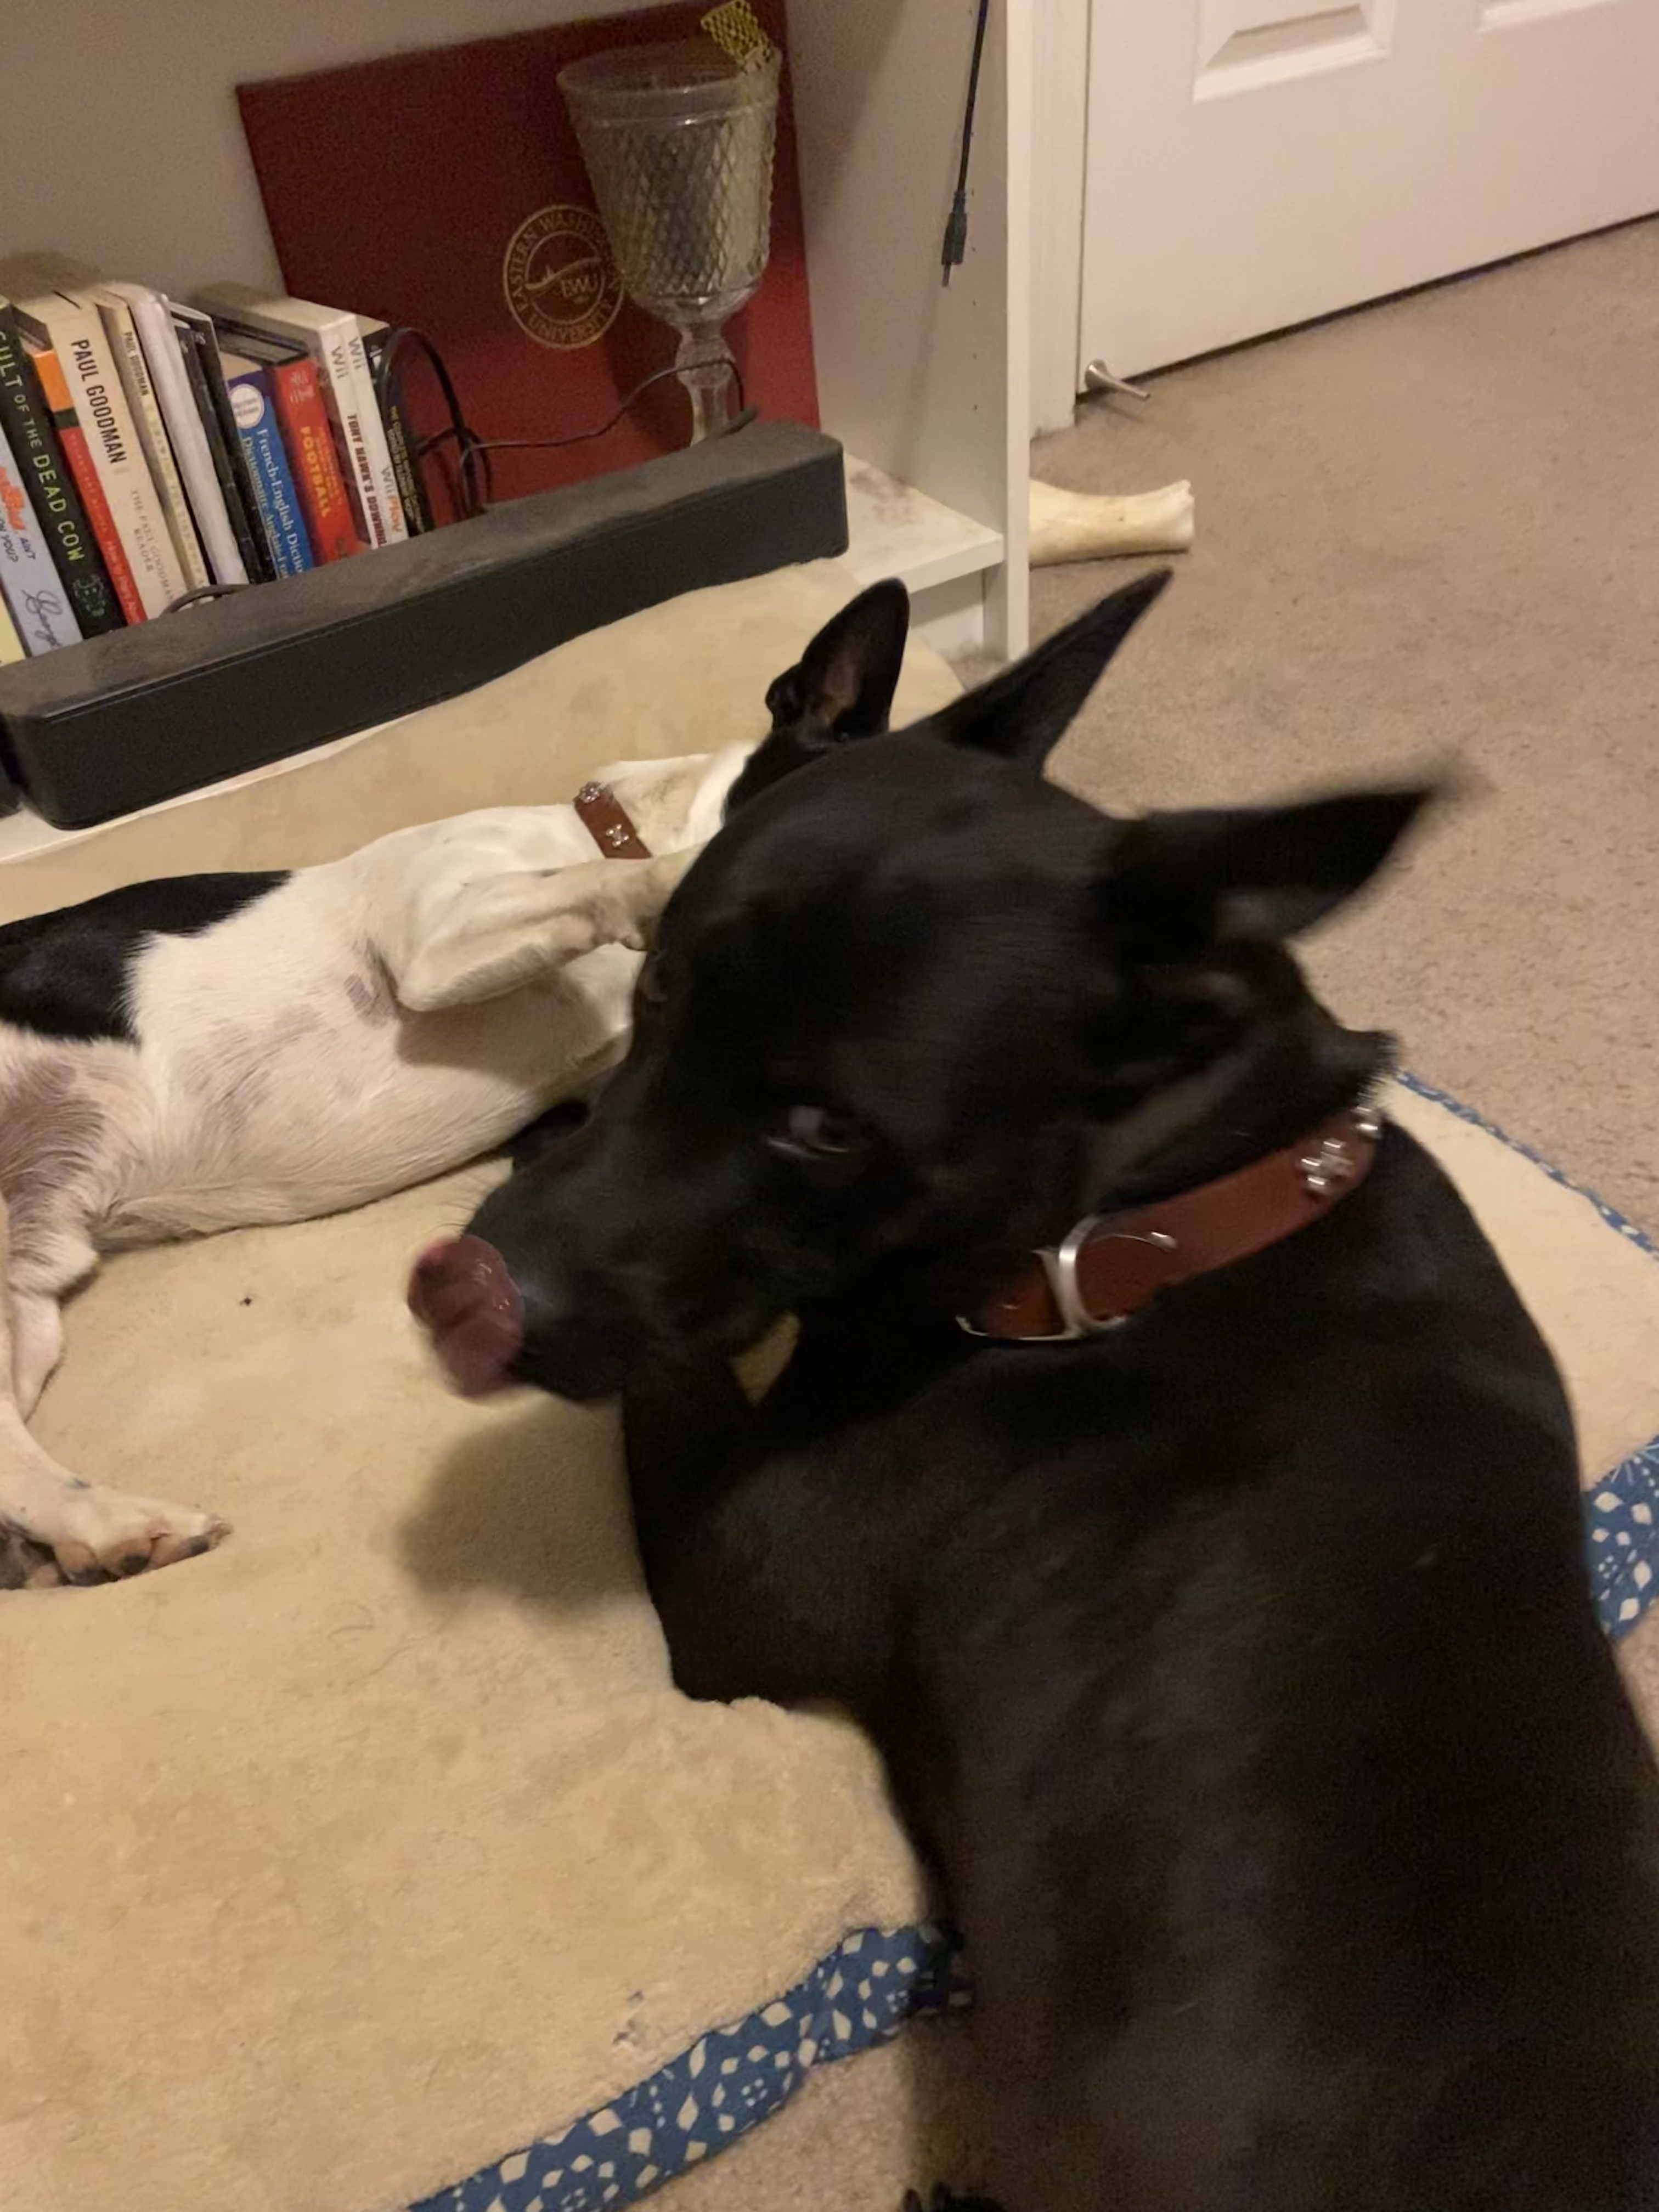 Two dogs lying together, one sticking his tongue out